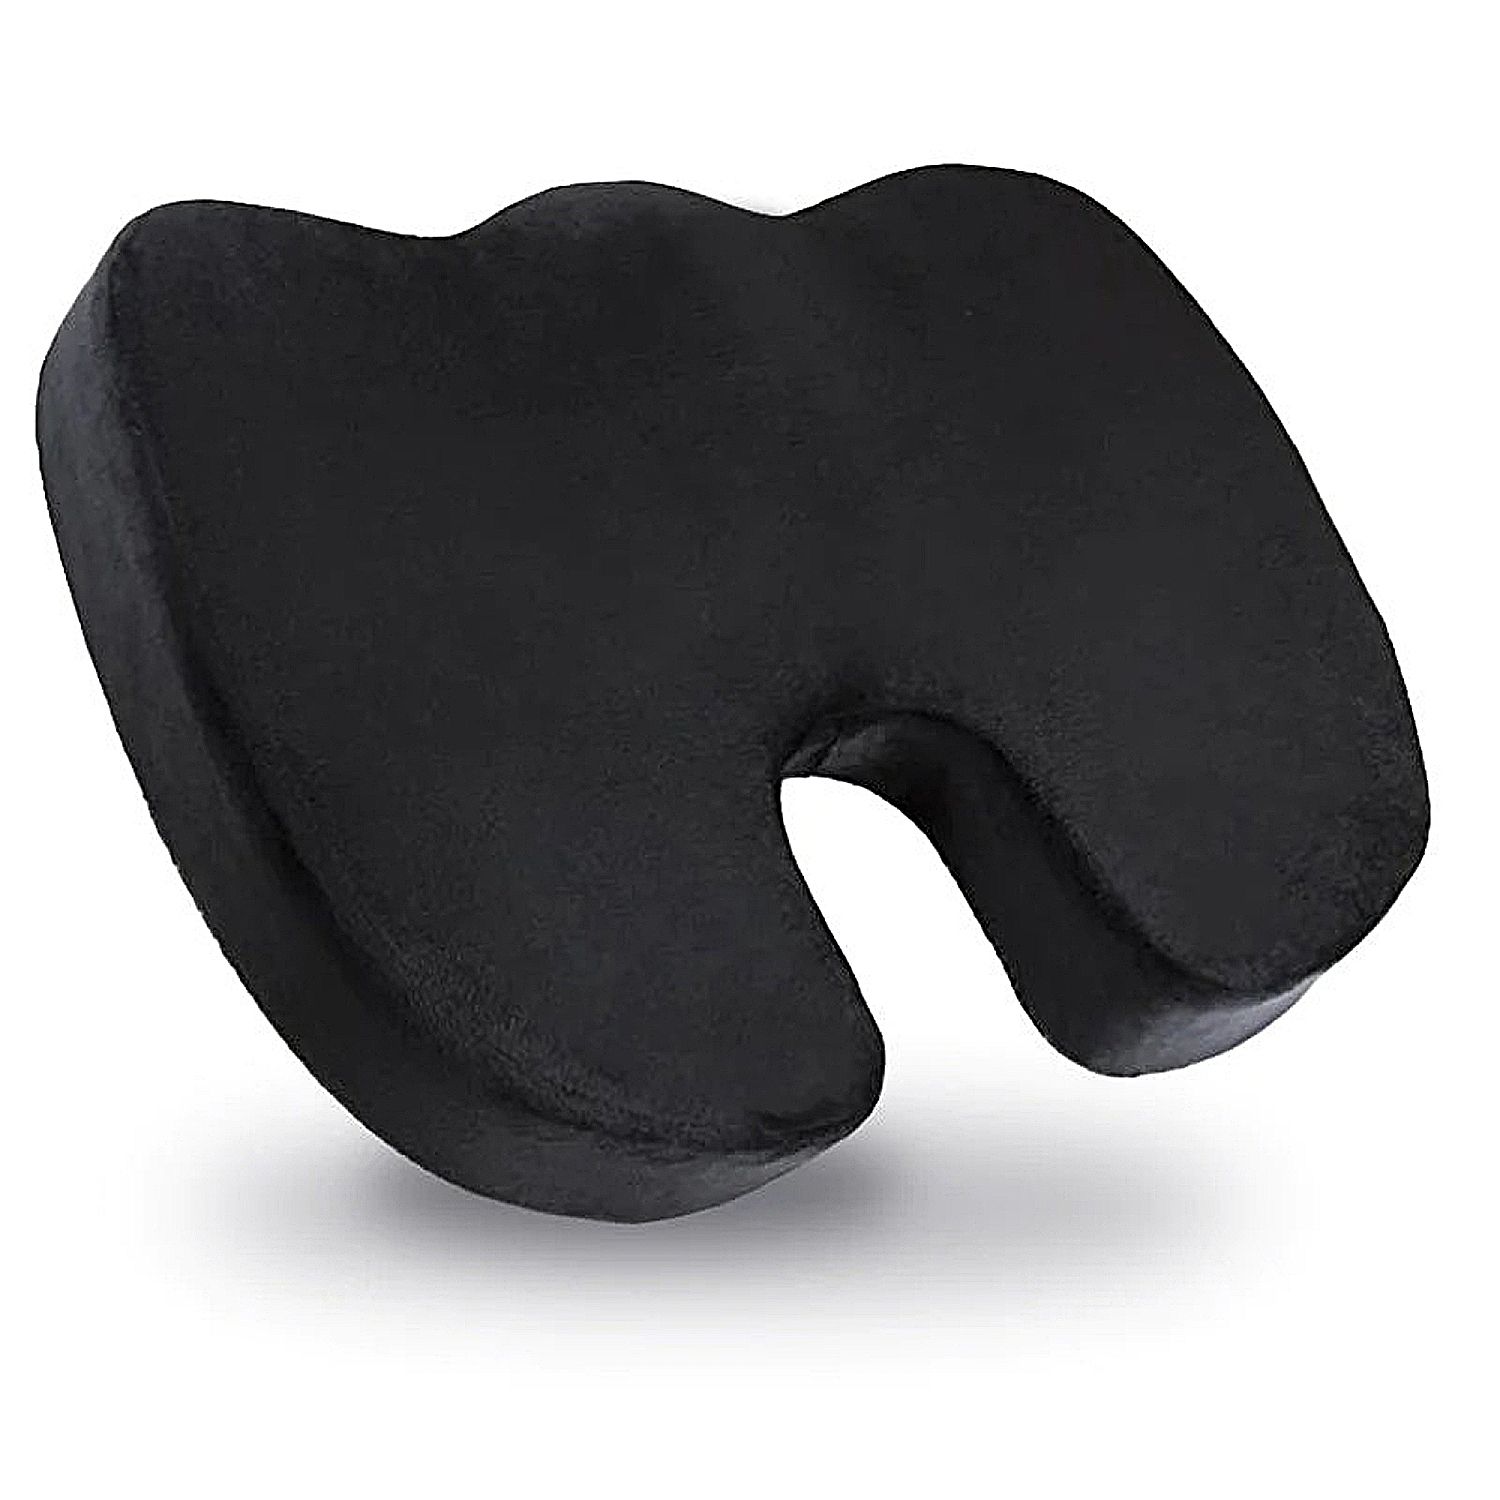 Carex Memory Foam Coccyx Seat Cushion - Tailbone Pain Relief Cushion -  Sciatica Pillow for Sitting and Pain Relief